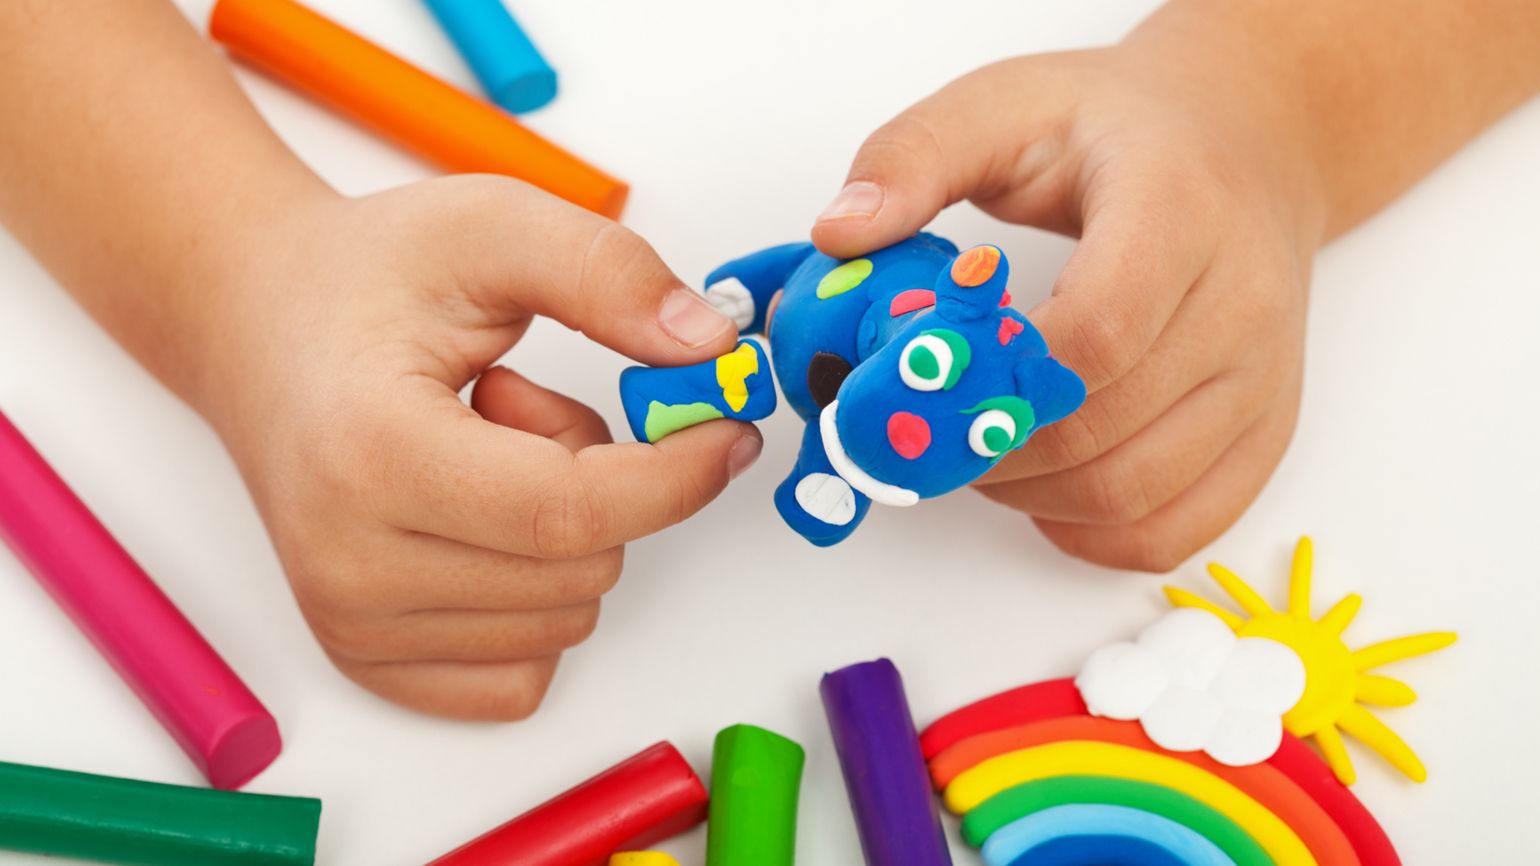 A child's hands building an animal with blue Play-Doh.